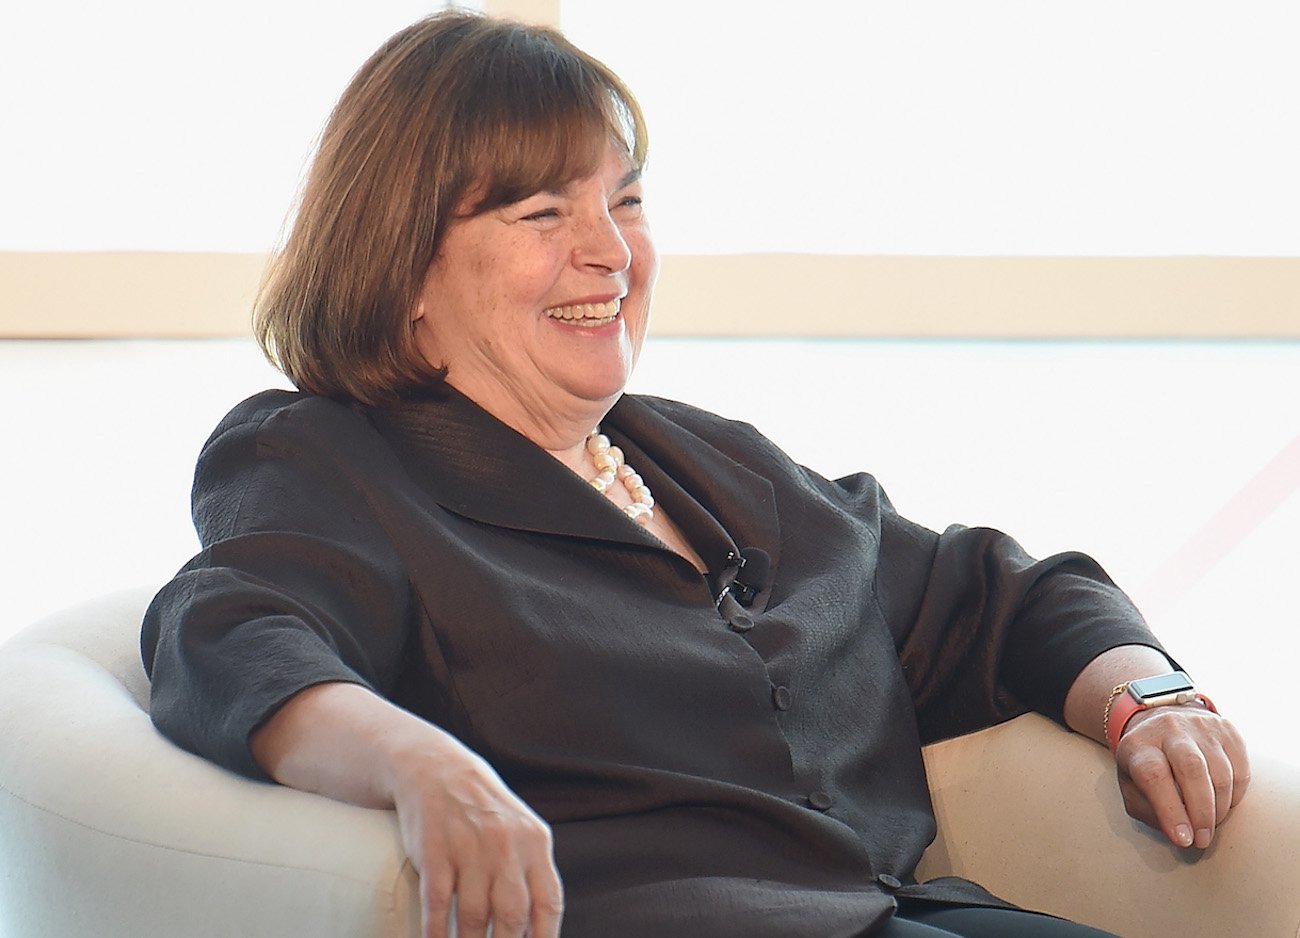 Ina Garten is all smiles as she sits on a chair in a black button down shirt